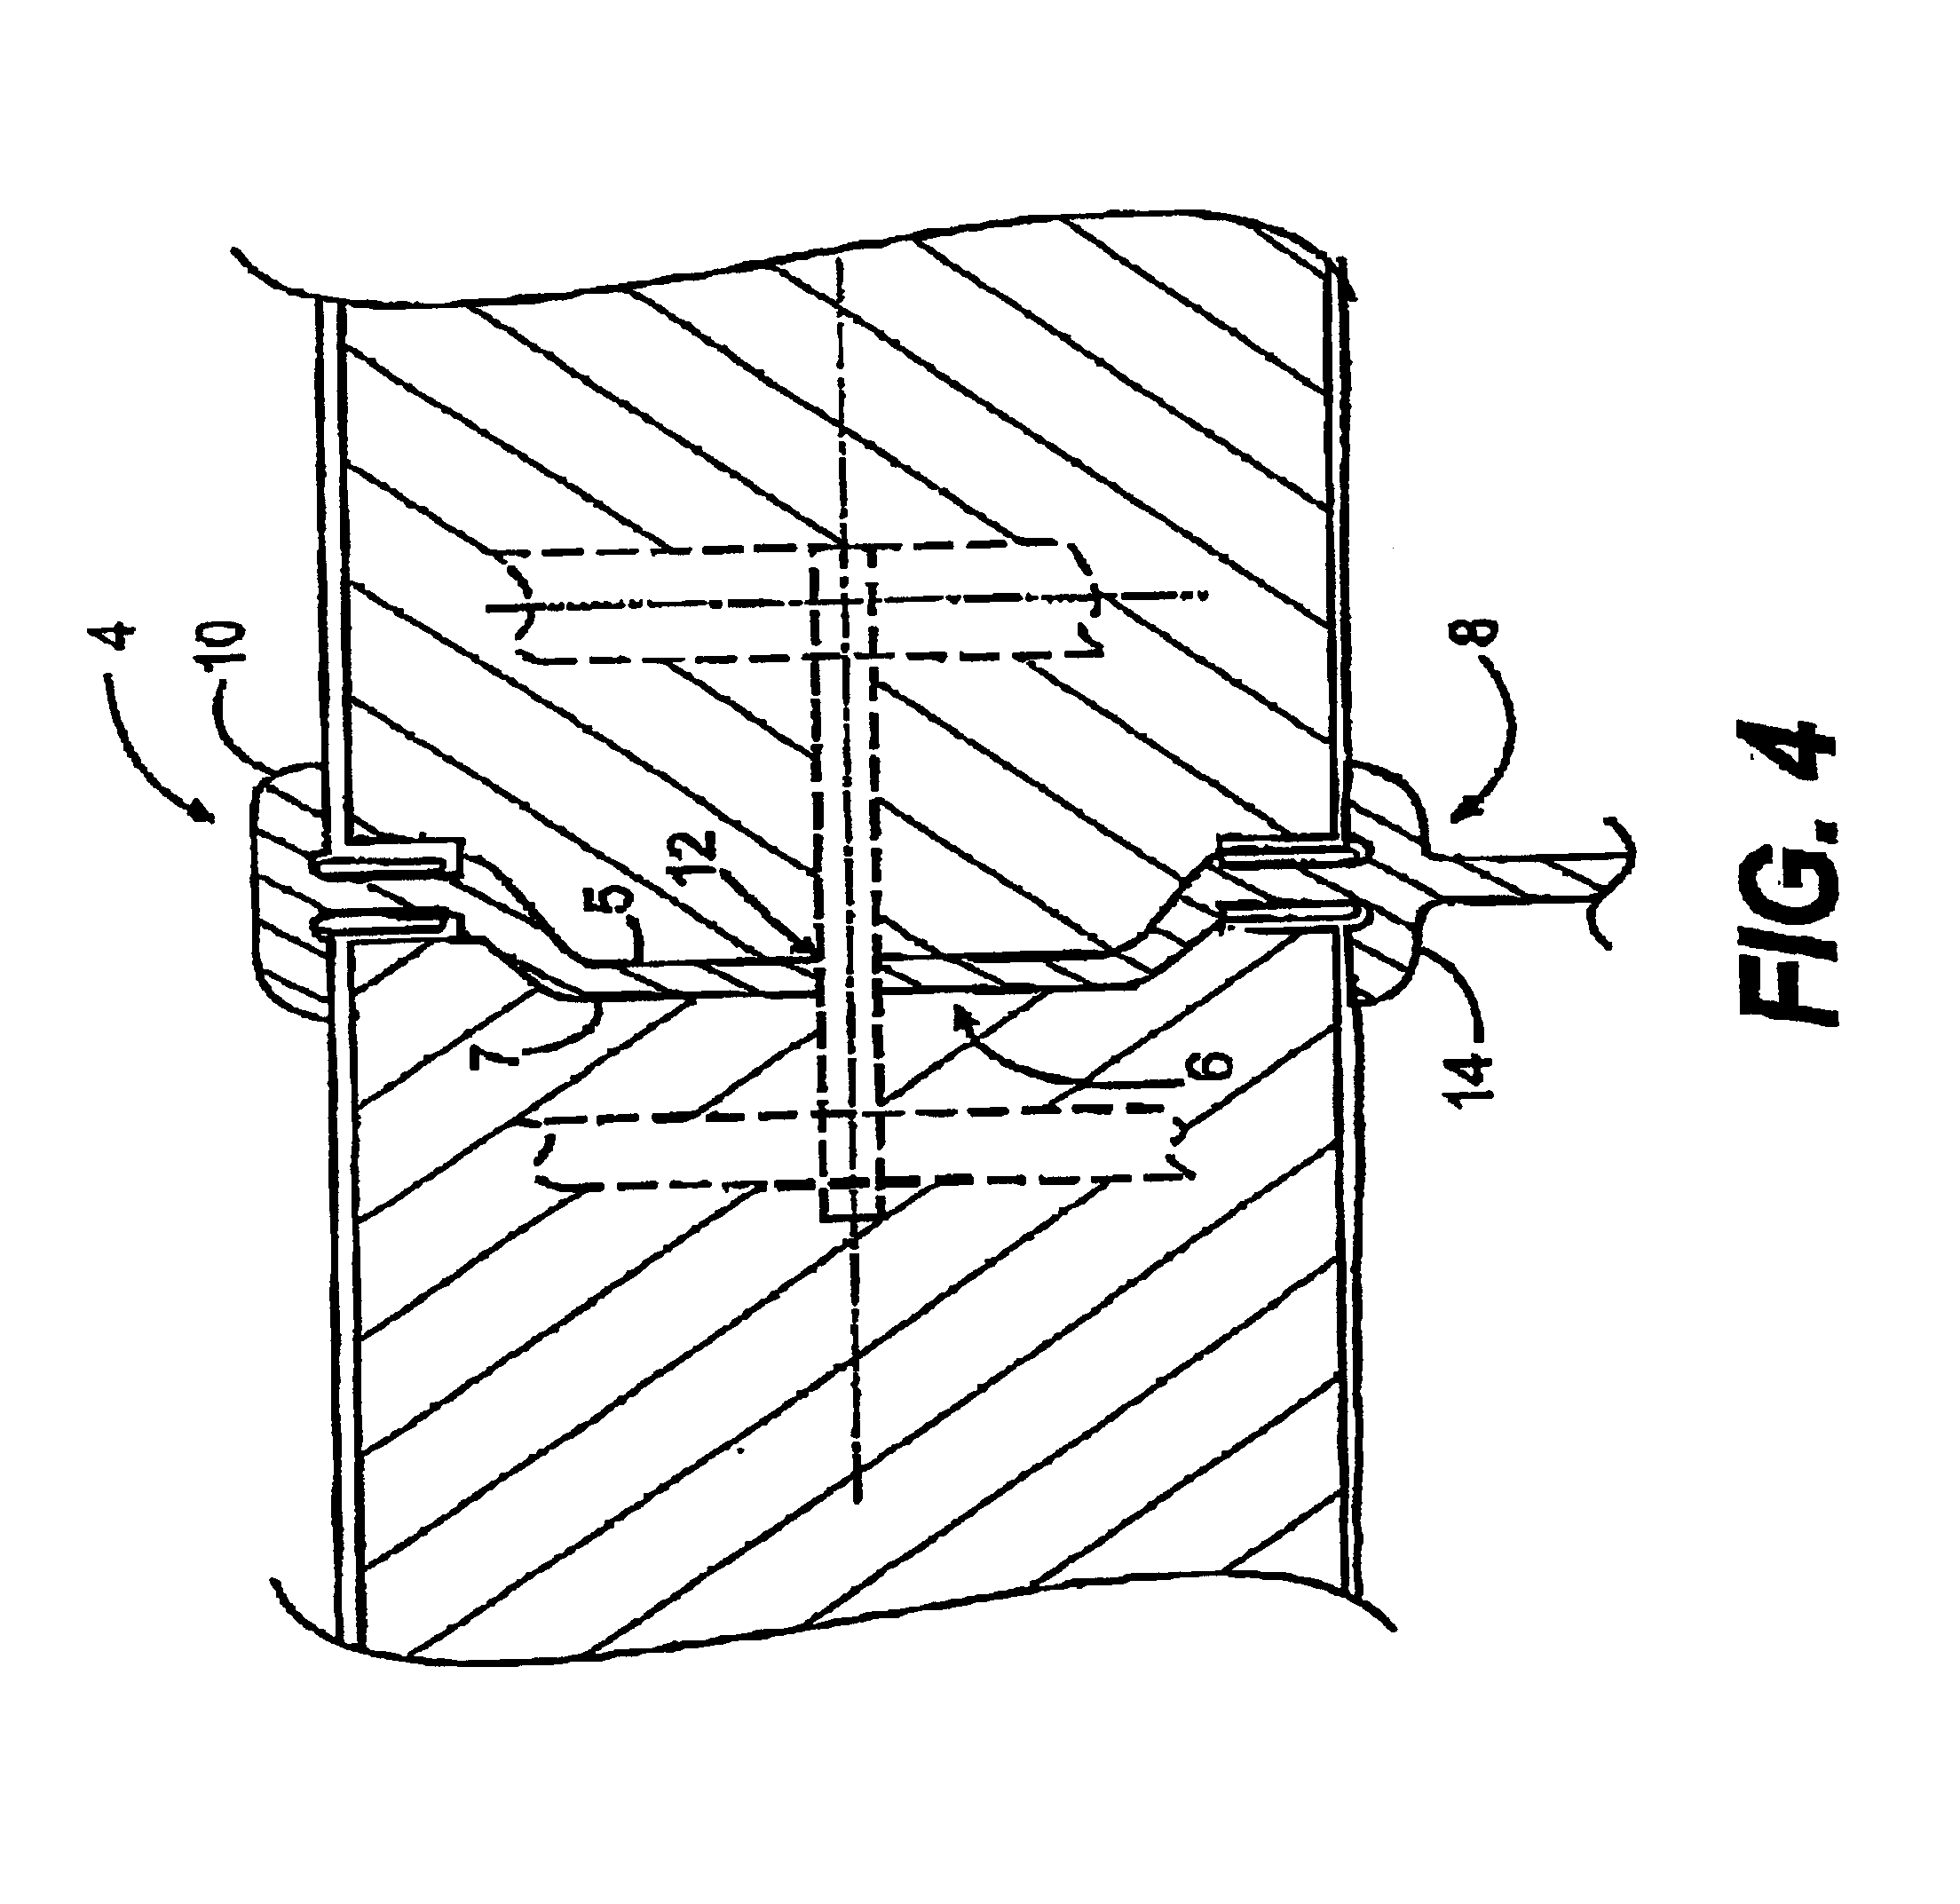 Support for securing cantilevered shelving to an insulated unit